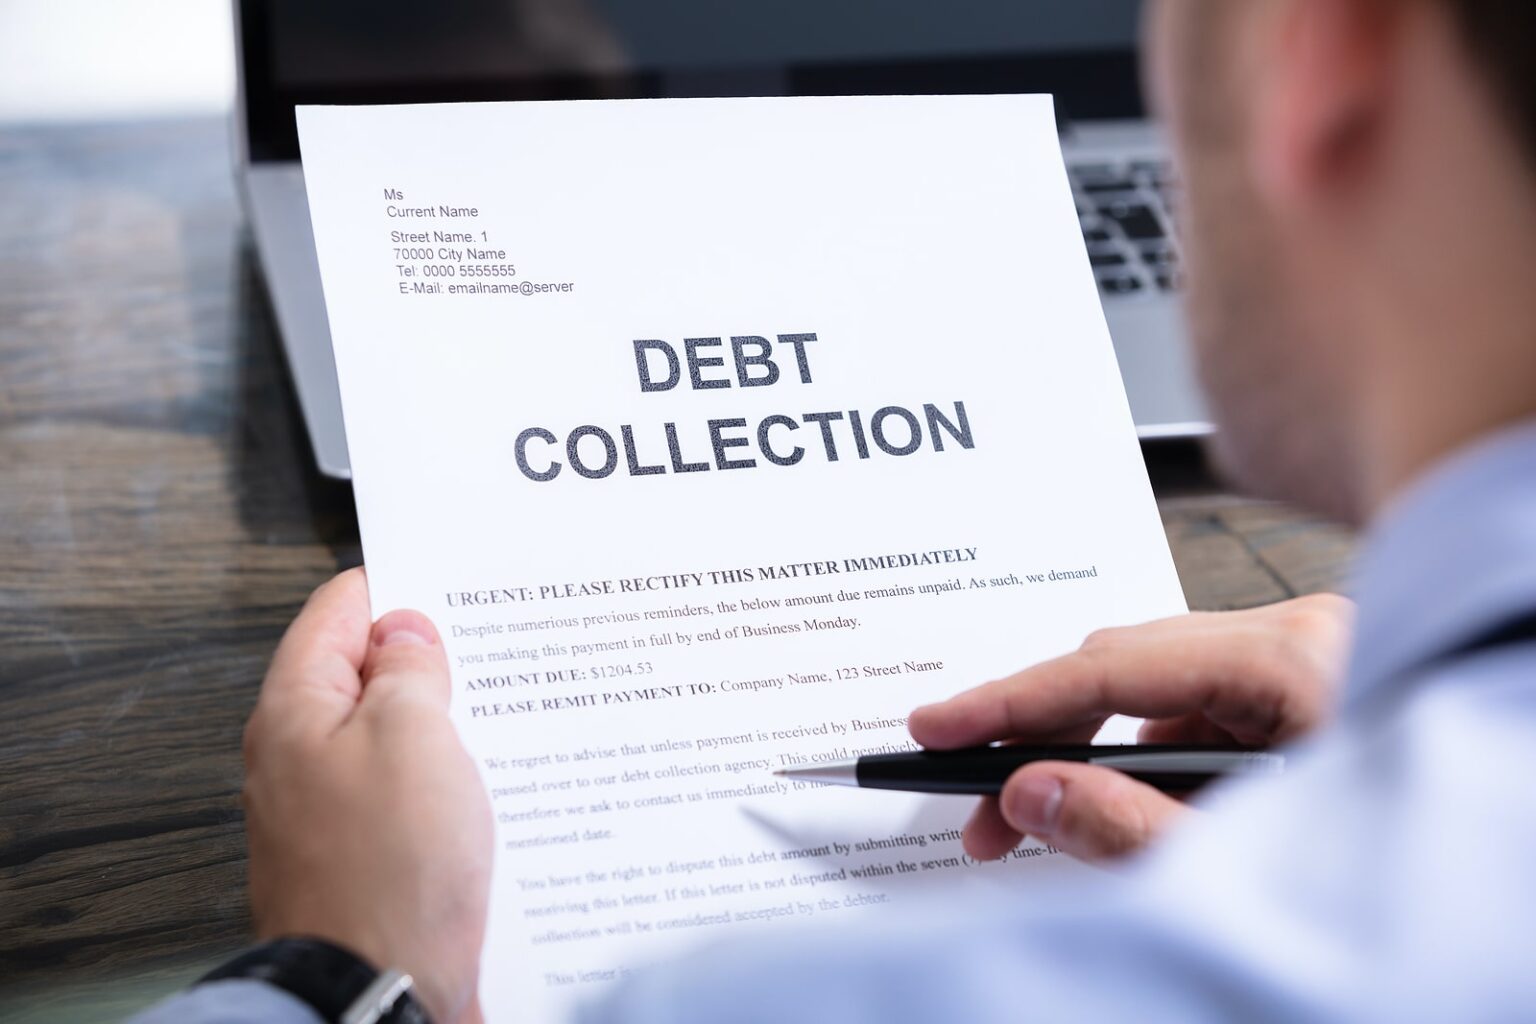 If you've ever owed money, a debt collector has probably contacted you. Learn exactly what debt collection is so you can easily improve your finances.